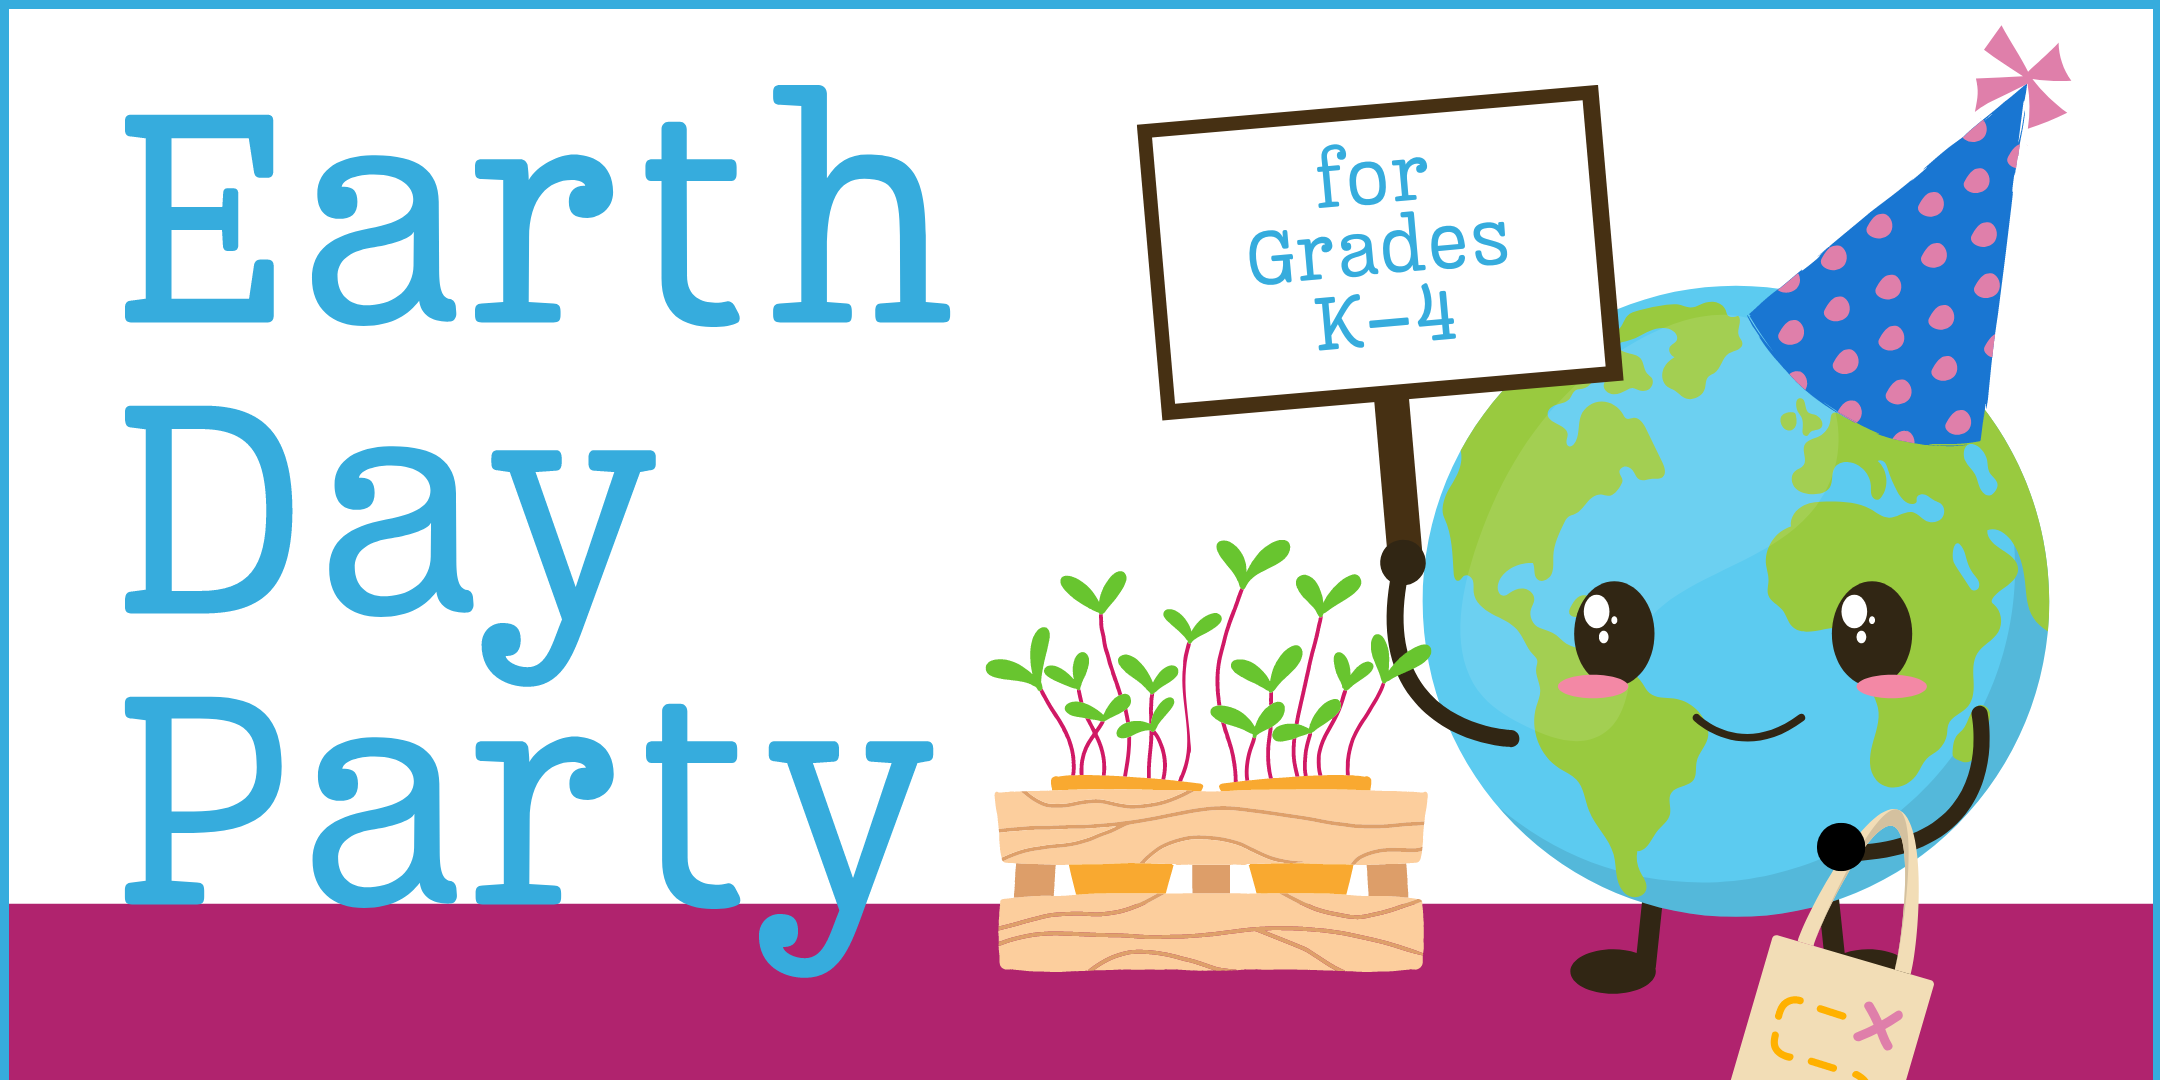 image of "Earth Day Party"